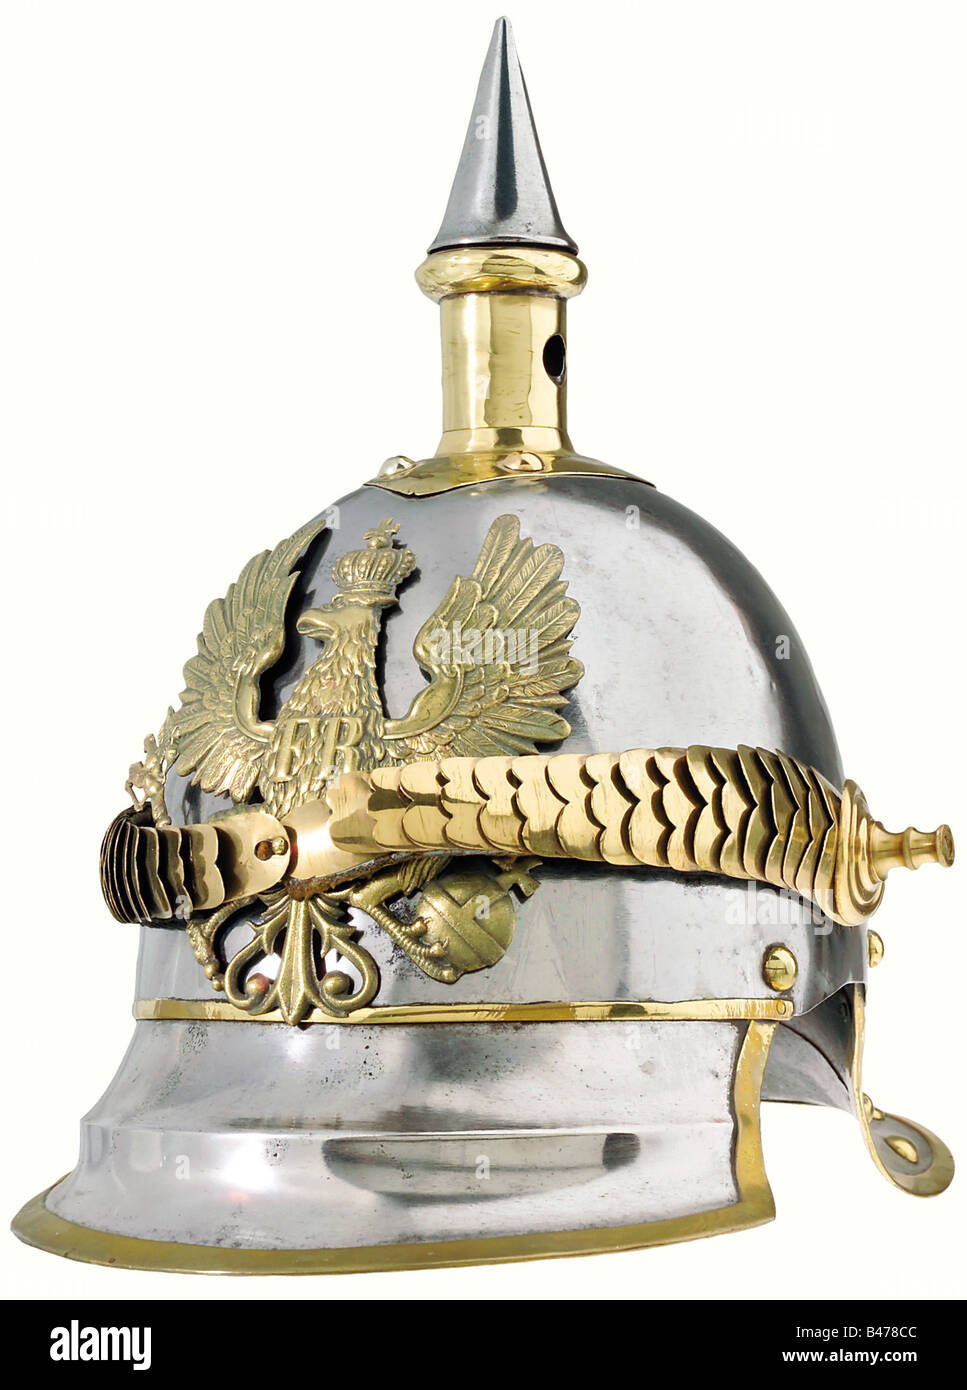 Prussia: A helmet for troopers, of cuirassiers of the line, 1853 pattern. Brass-rimmed steel skull, with slight rust scarring. Some former attachment holes have been filled in by soldering. Brass fittings. The plate is of an older pattern. The cambered chinscales (not original) are attached by long replacement stud bolts. Multiple stamp marks are visible below the left rosette. The leather liner of the visor has some flaws, and the lining of the skull is missing. Approx. size 56. historic, historical, 19th century, object, objects, stills, clipping, clippings, , Stock Photo